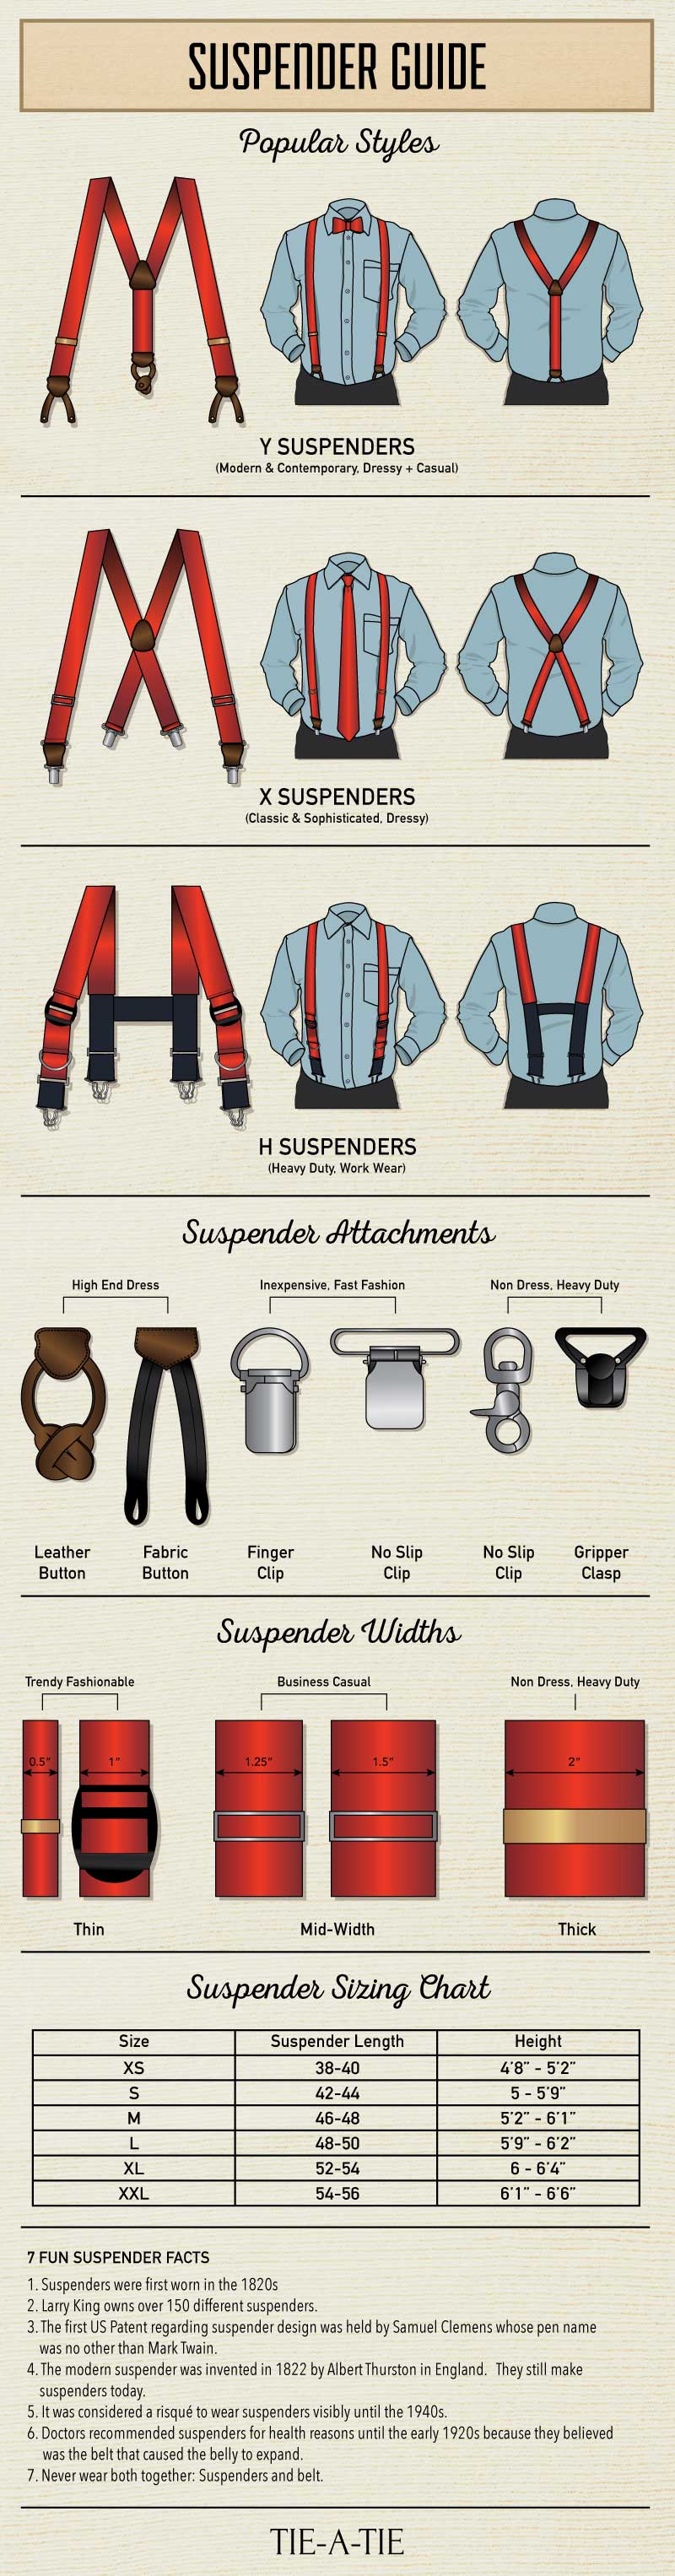 What are suspenders for? - Quora